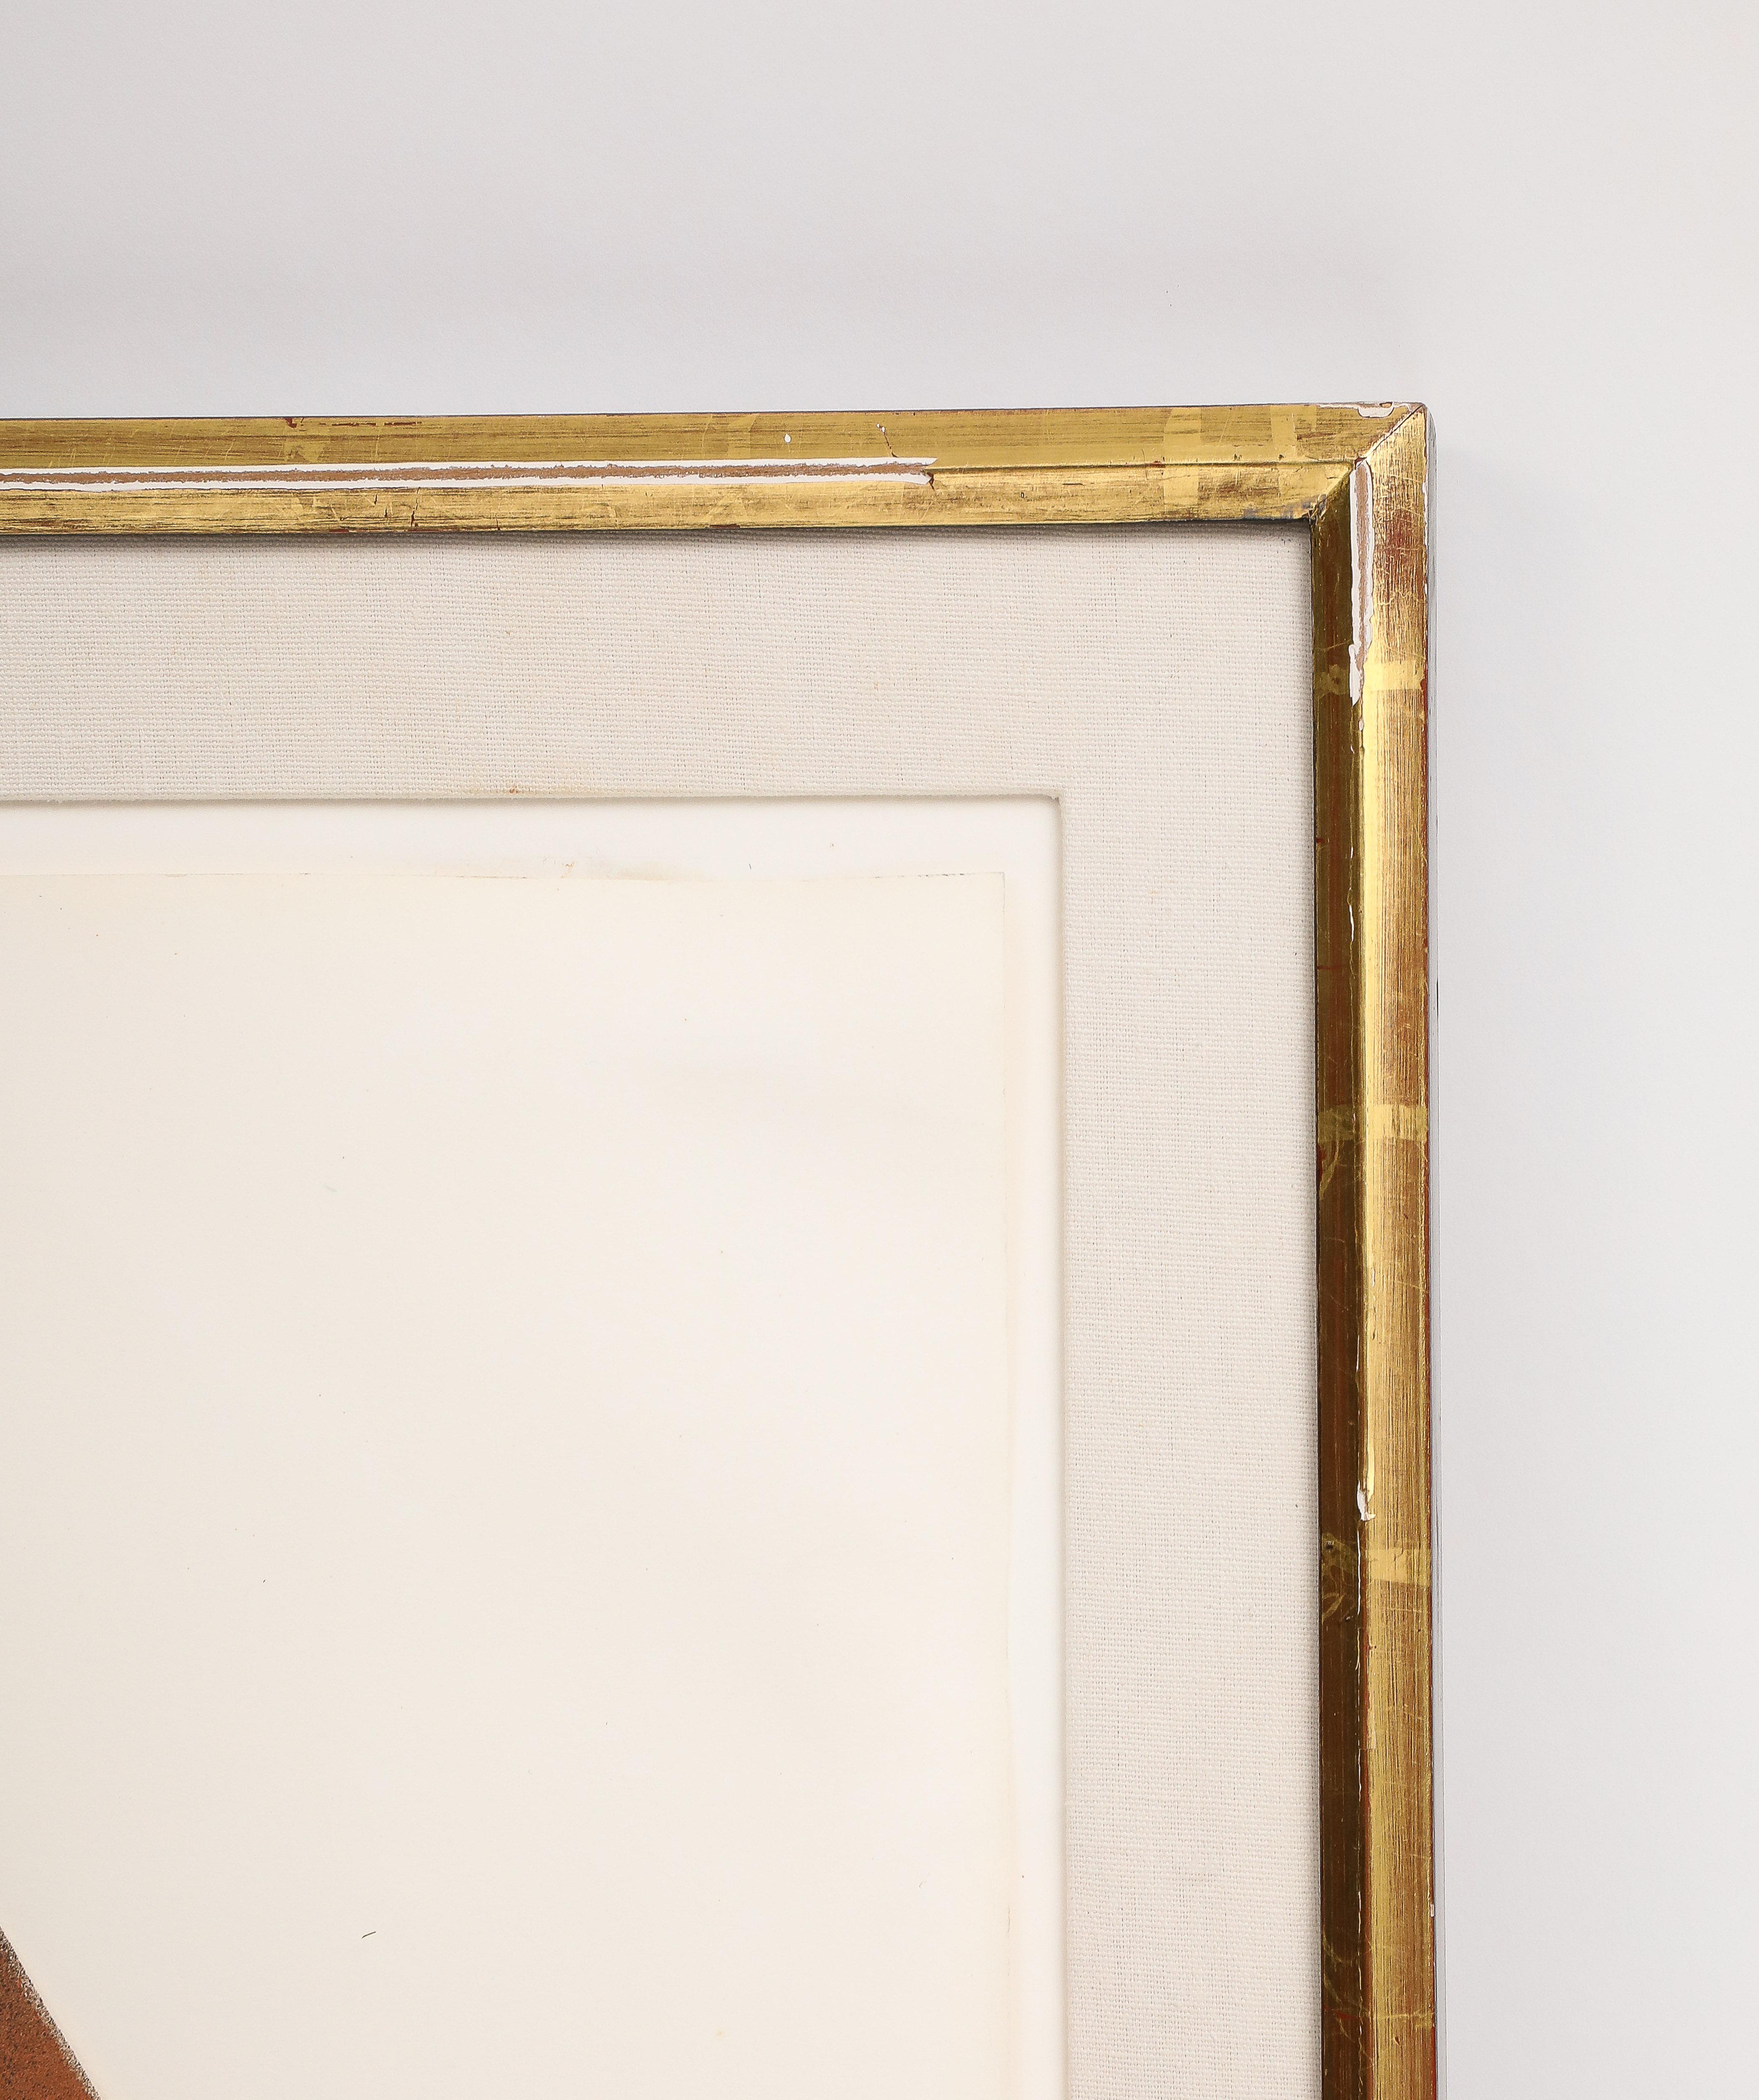 Vintage Japanese Painting of Kimono in Giltwood Frame, Signed and Numbered, 1970 For Sale 8